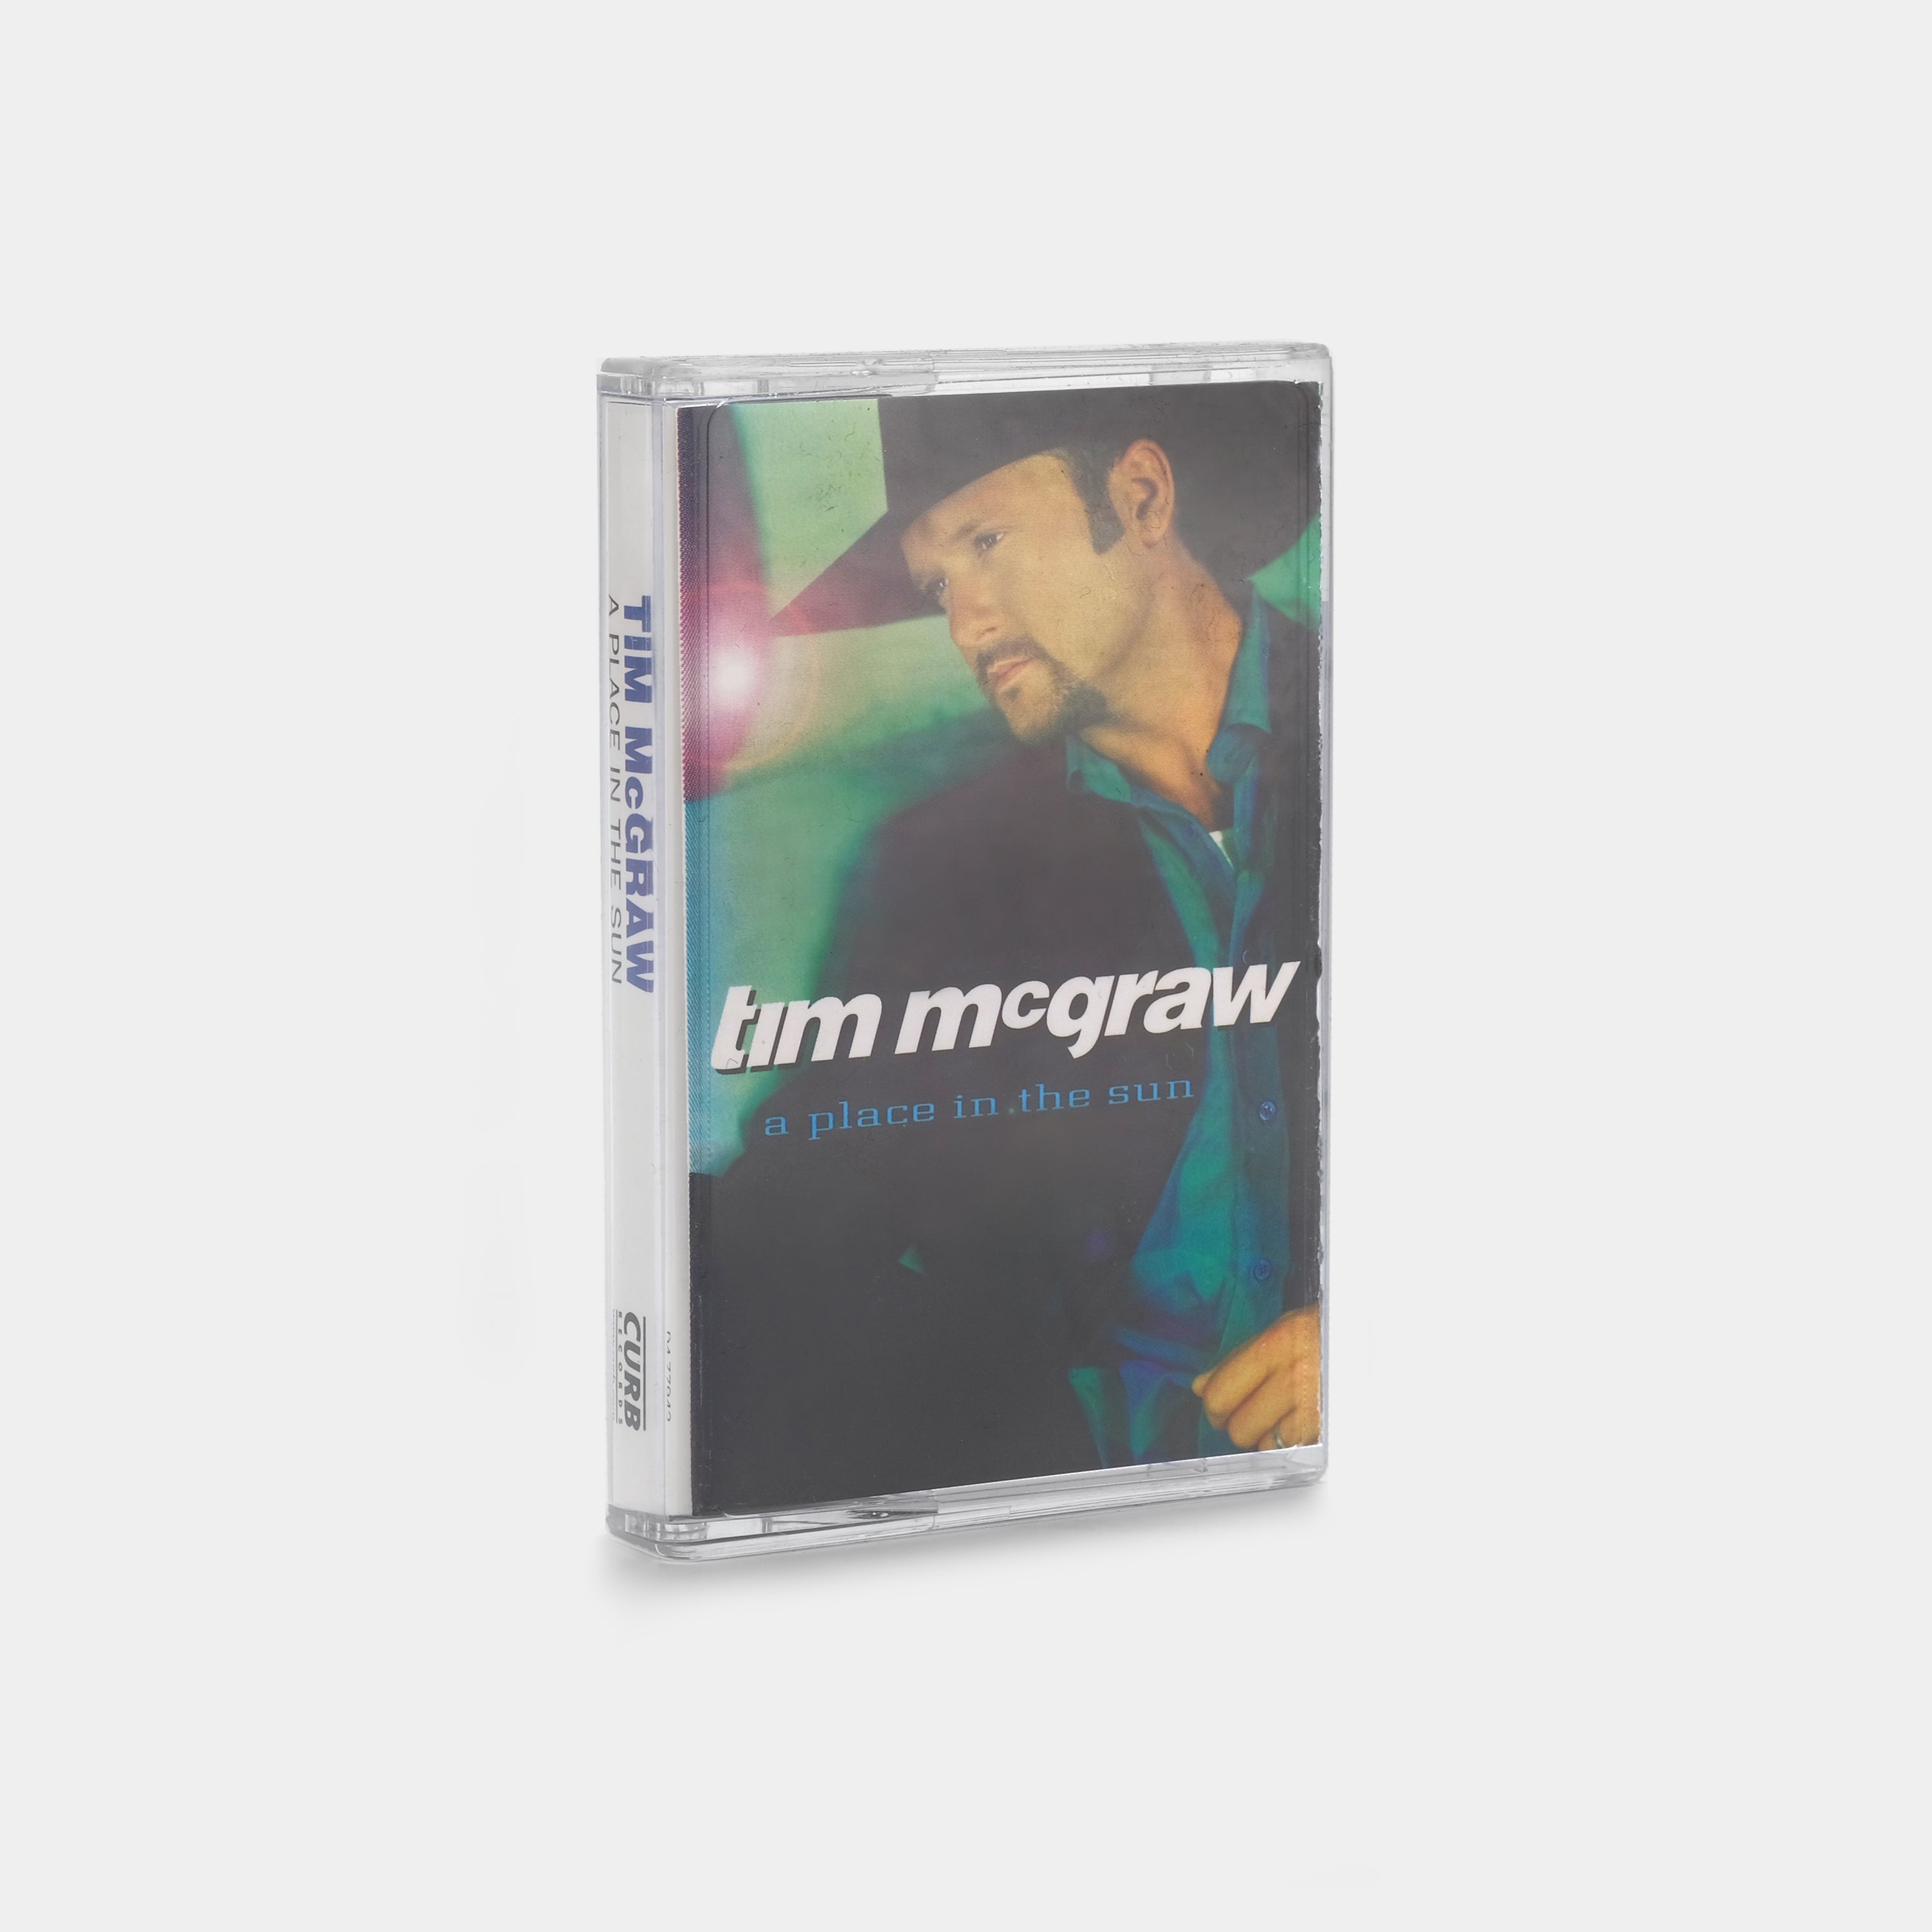 Tim McGraw - A Place in the Sun Cassette Tape